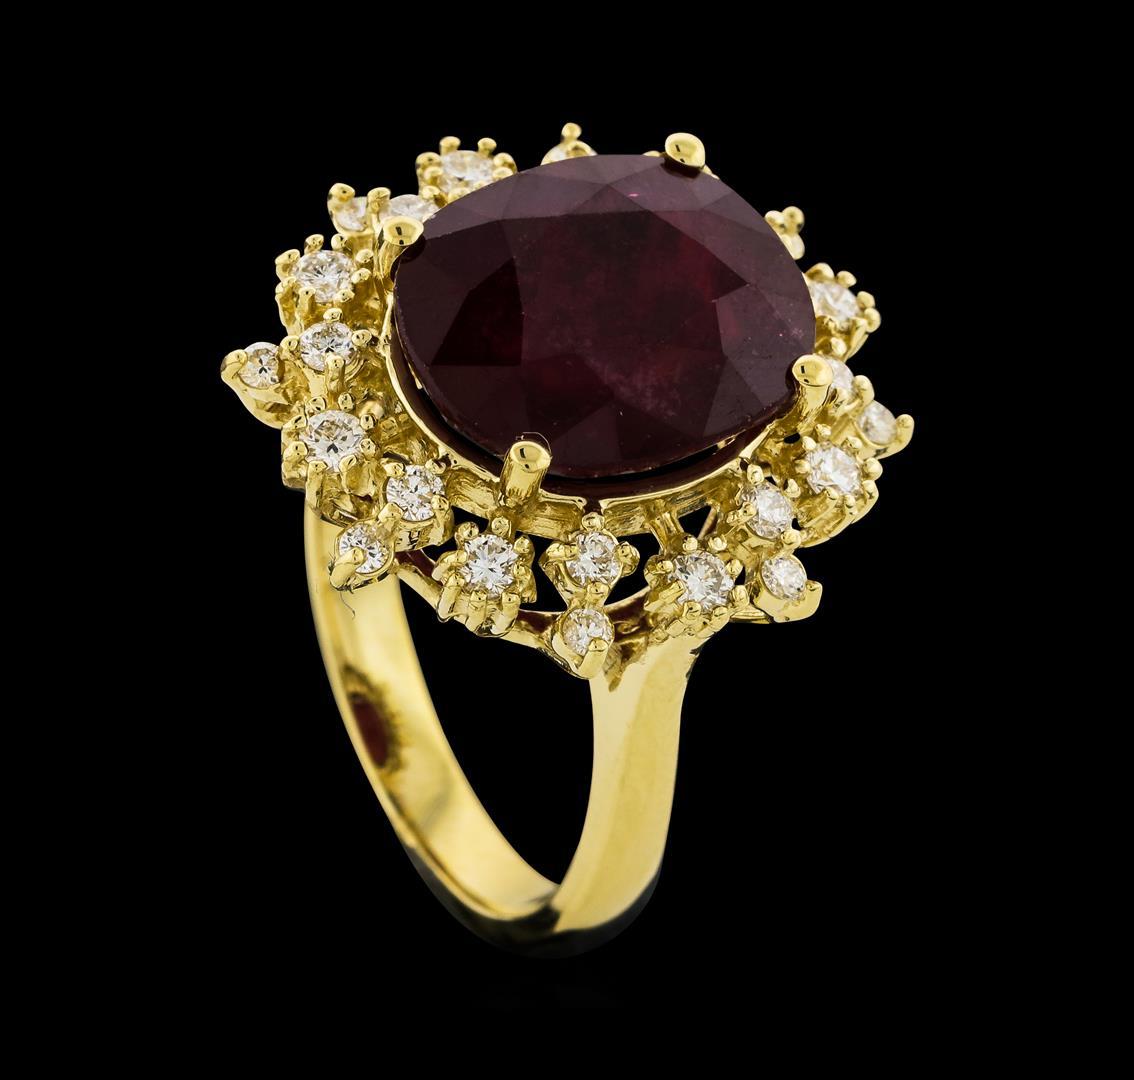 8.91 ctw Ruby and Diamond Ring - 14KT Yellow Gold